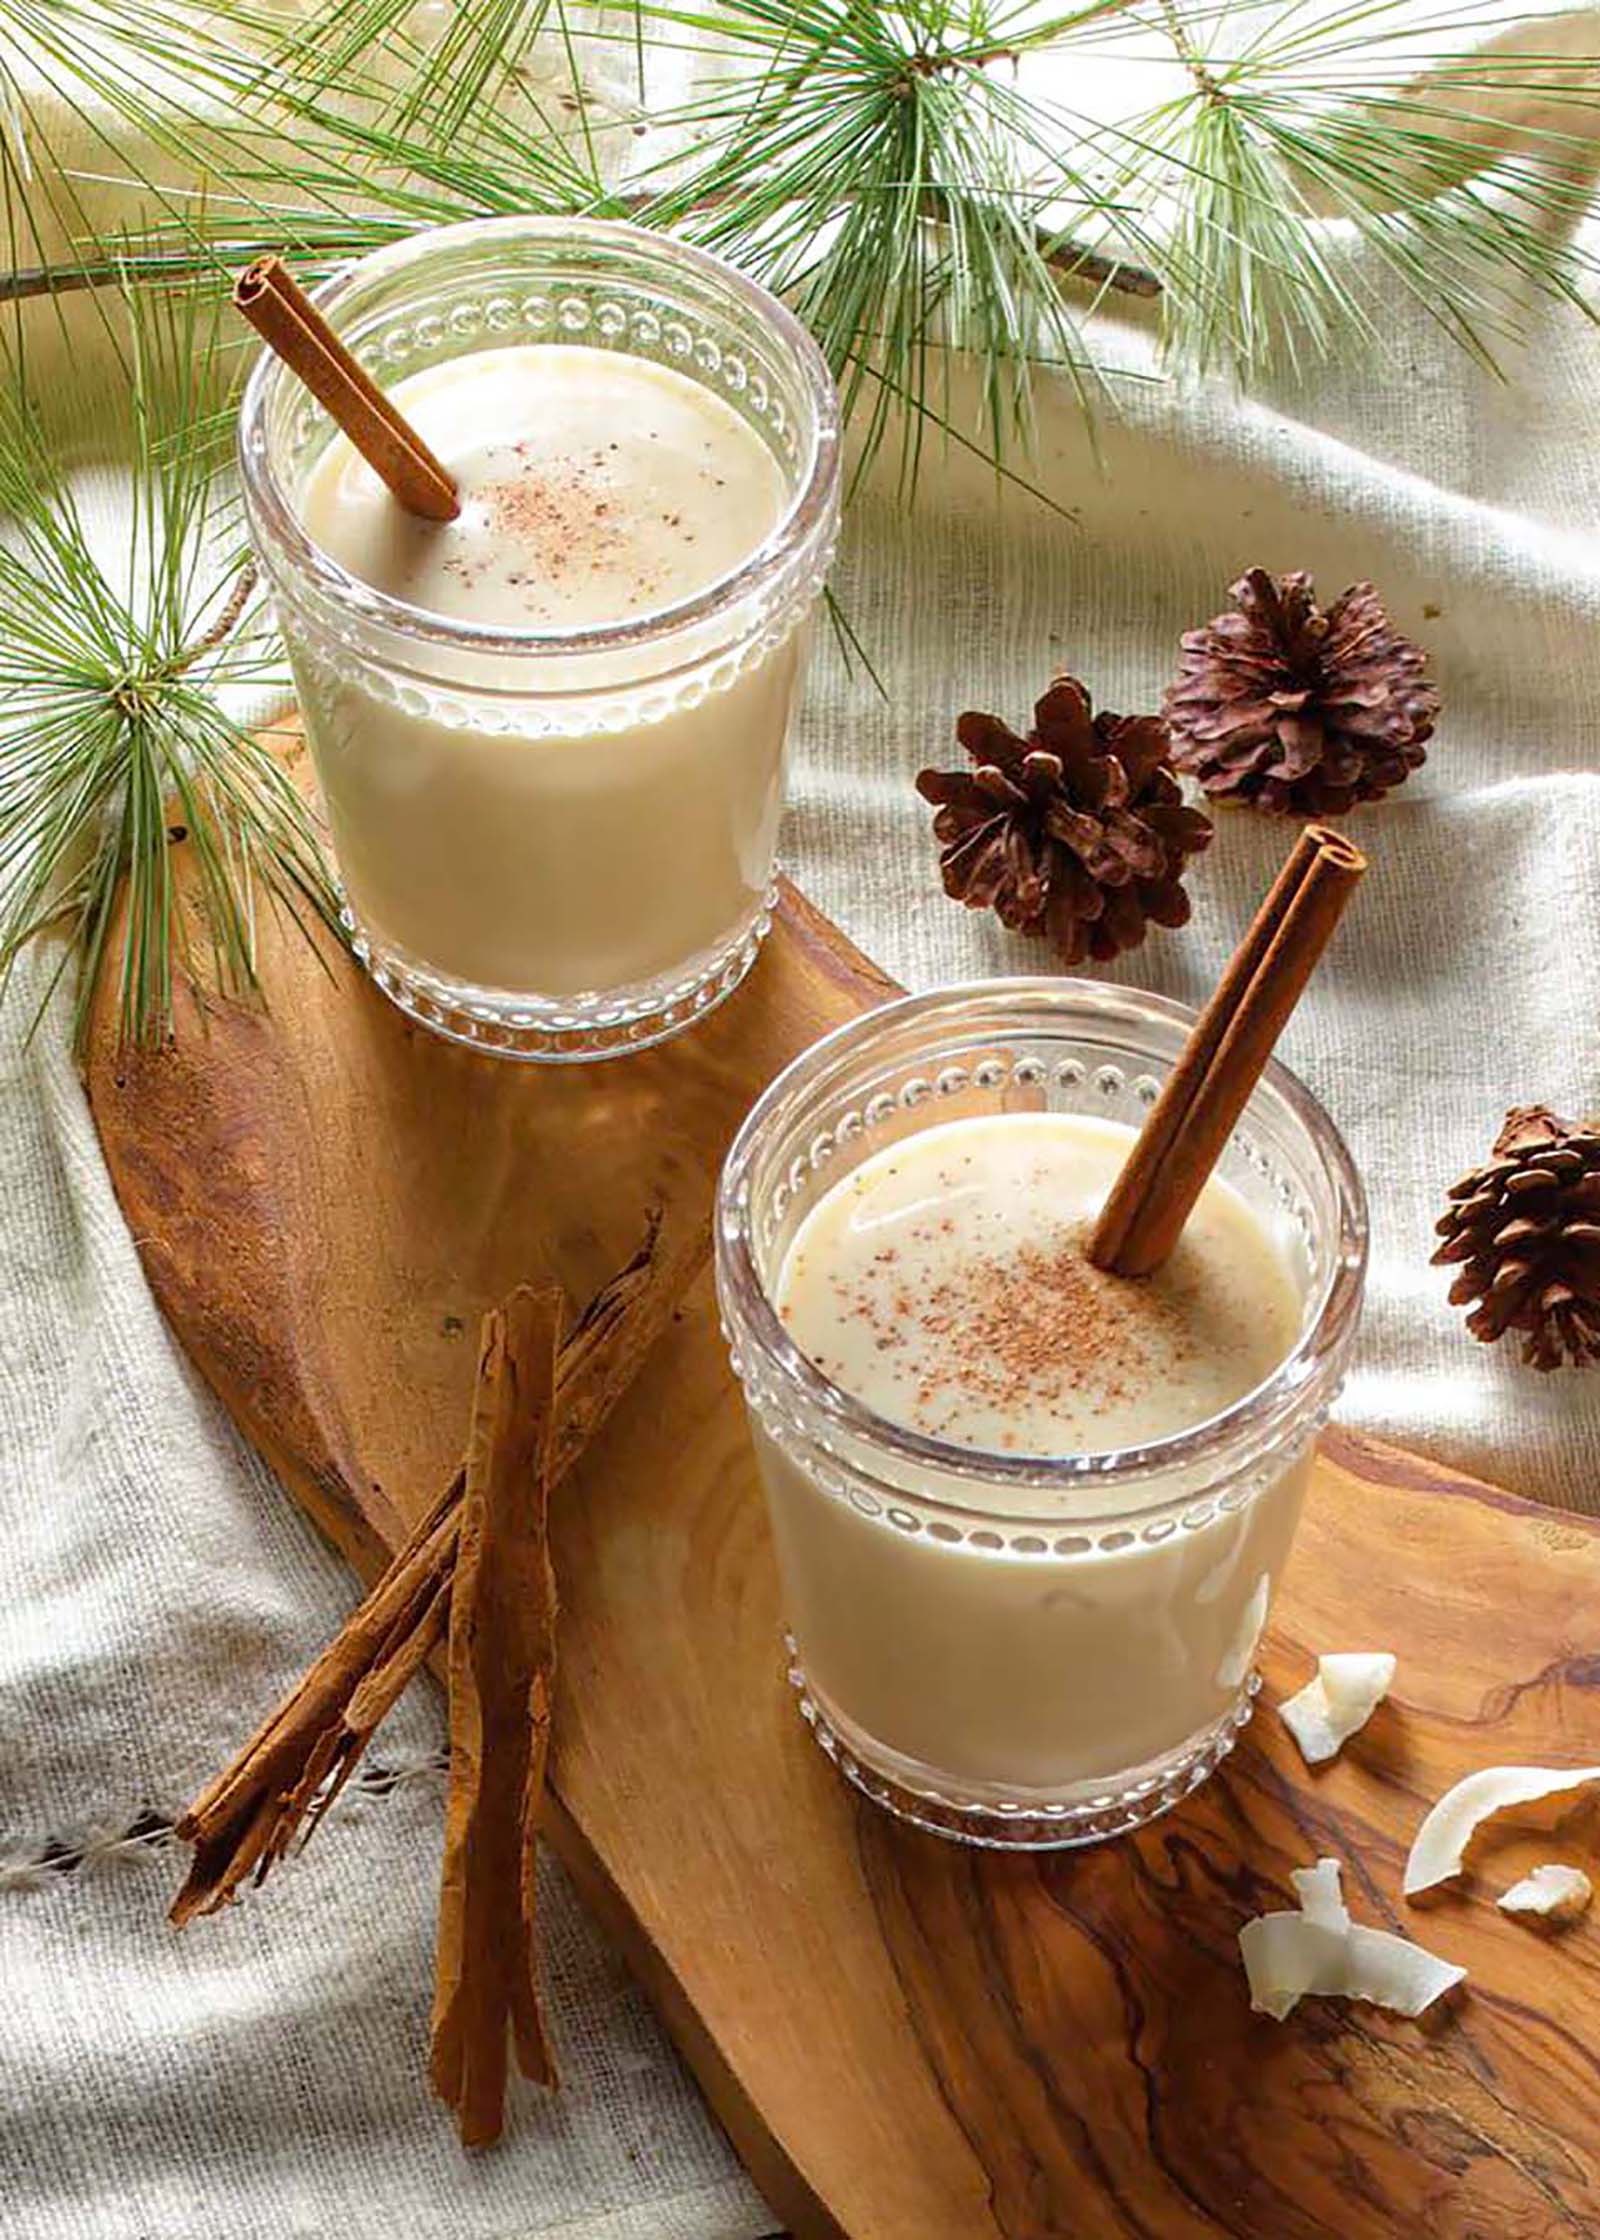 Celebrate the Holidays With Puerto Rican Coquito!